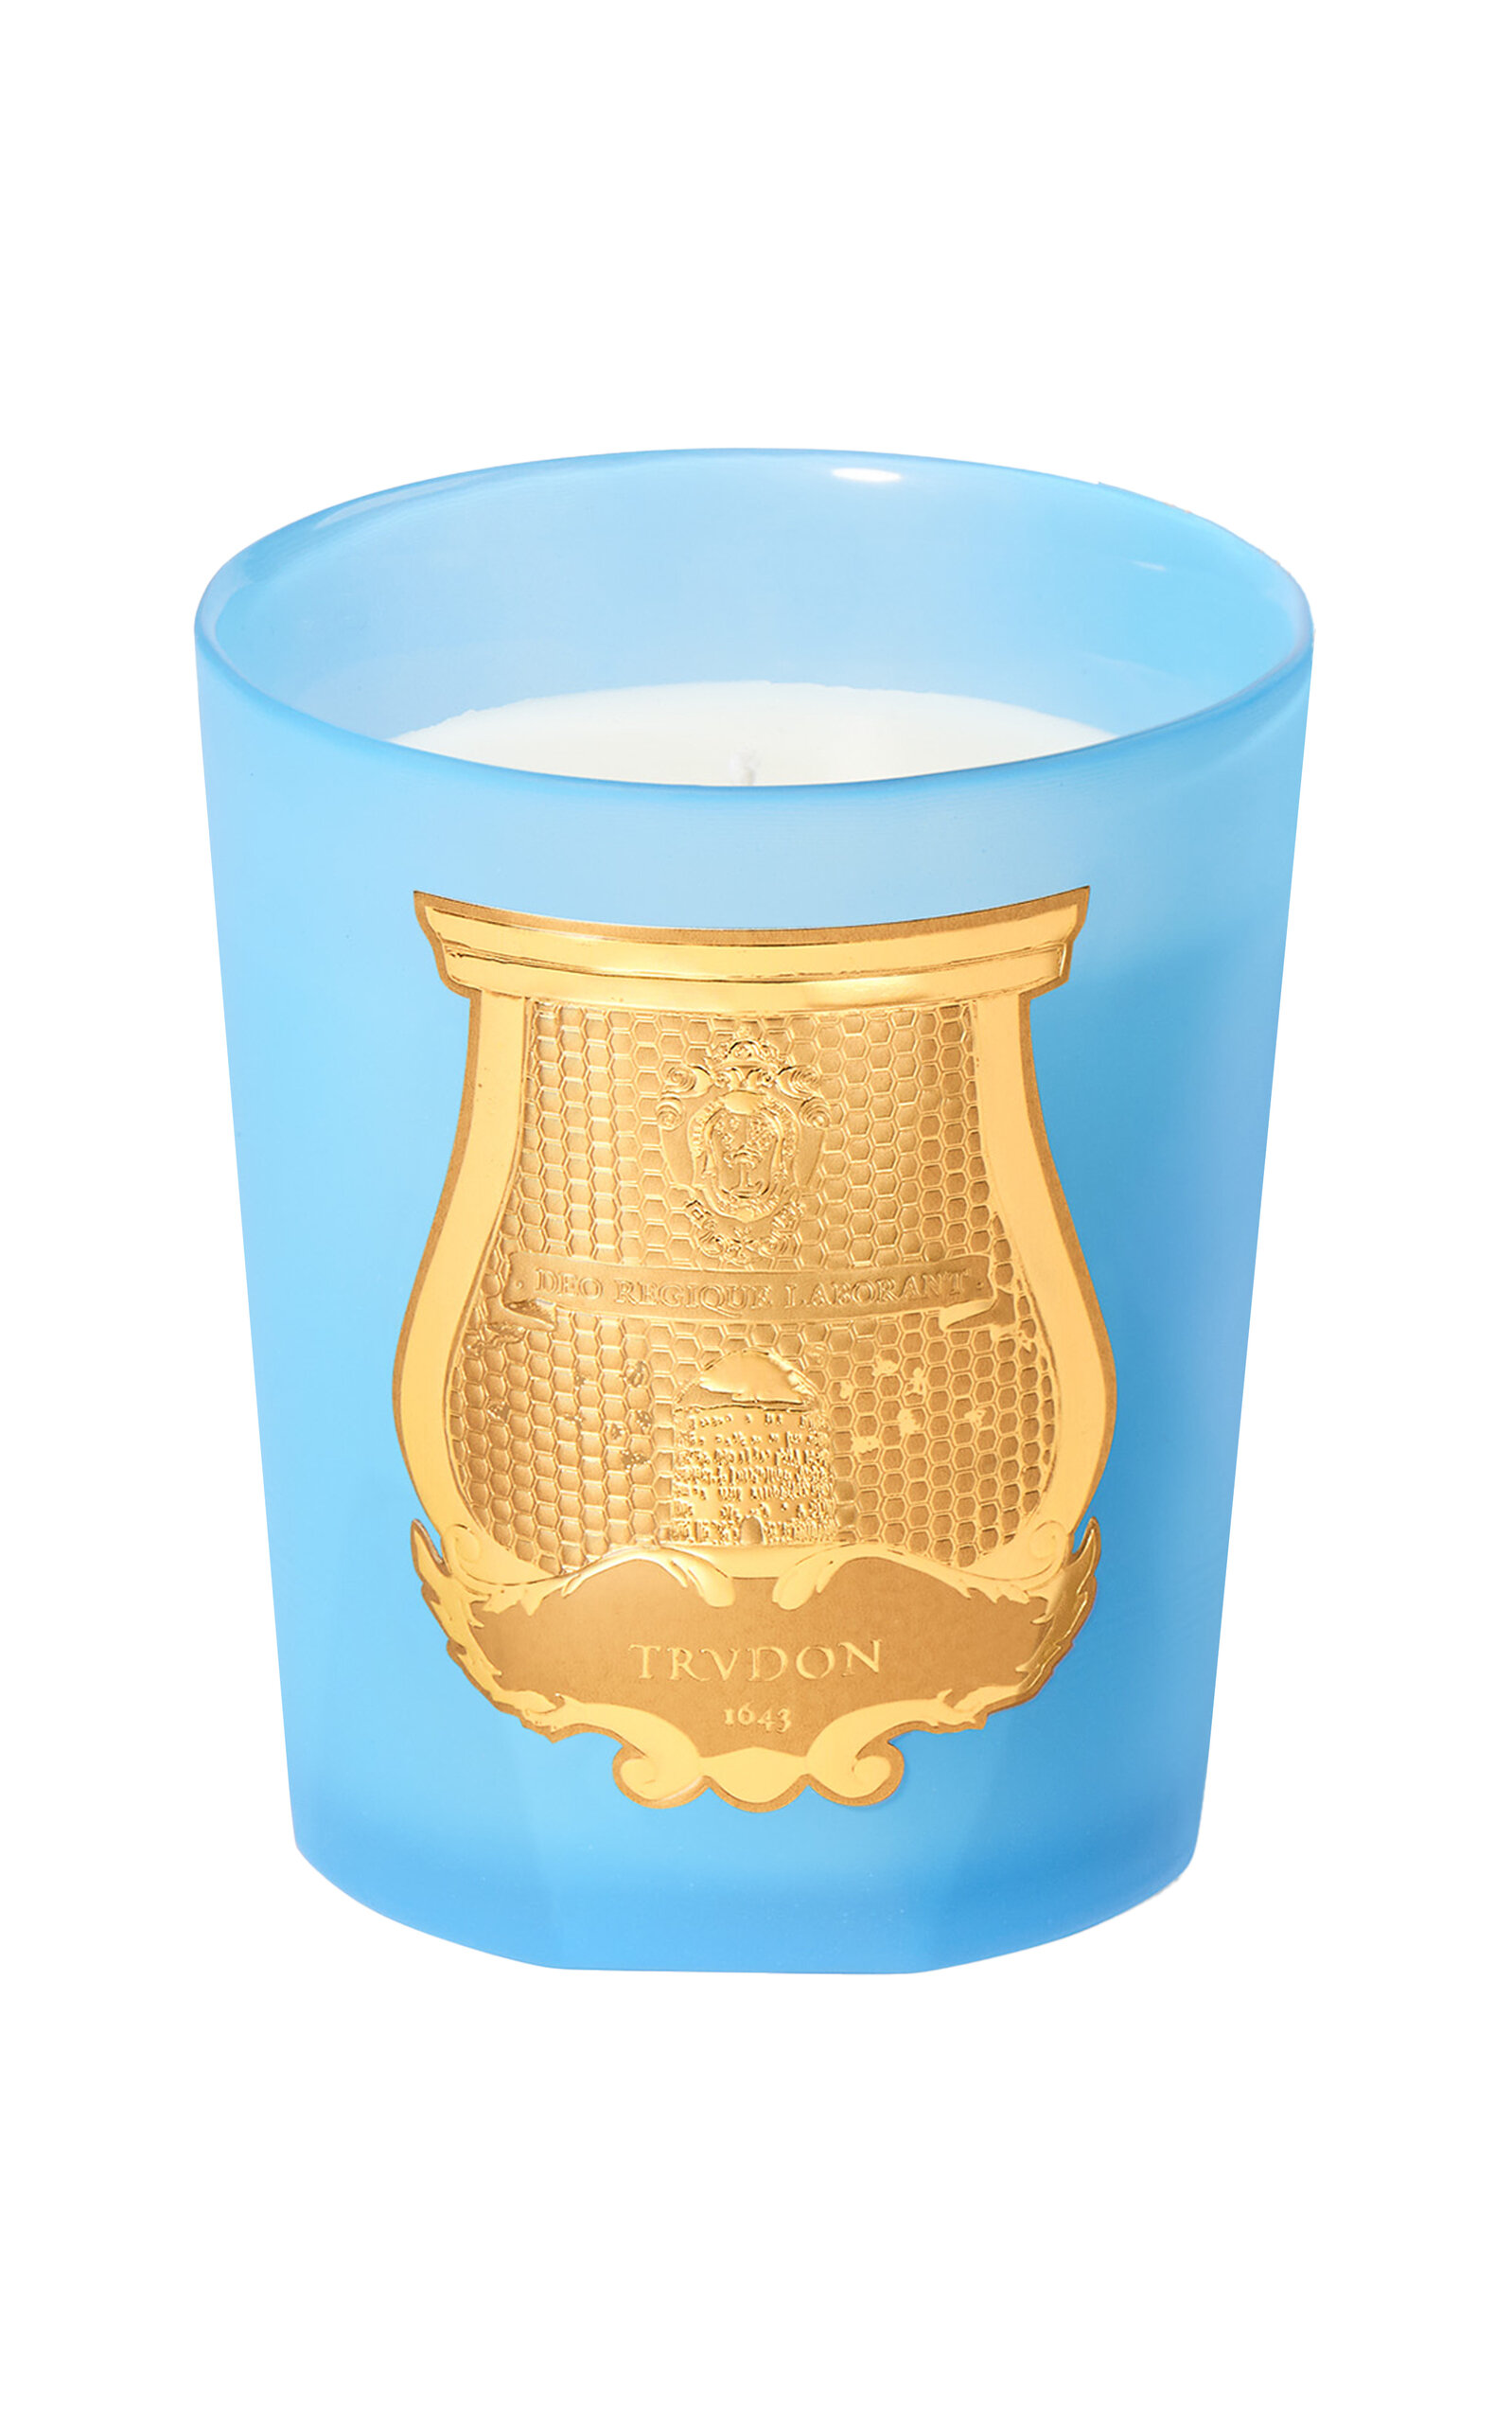 Cire Trudon Versailles Candle In Blue